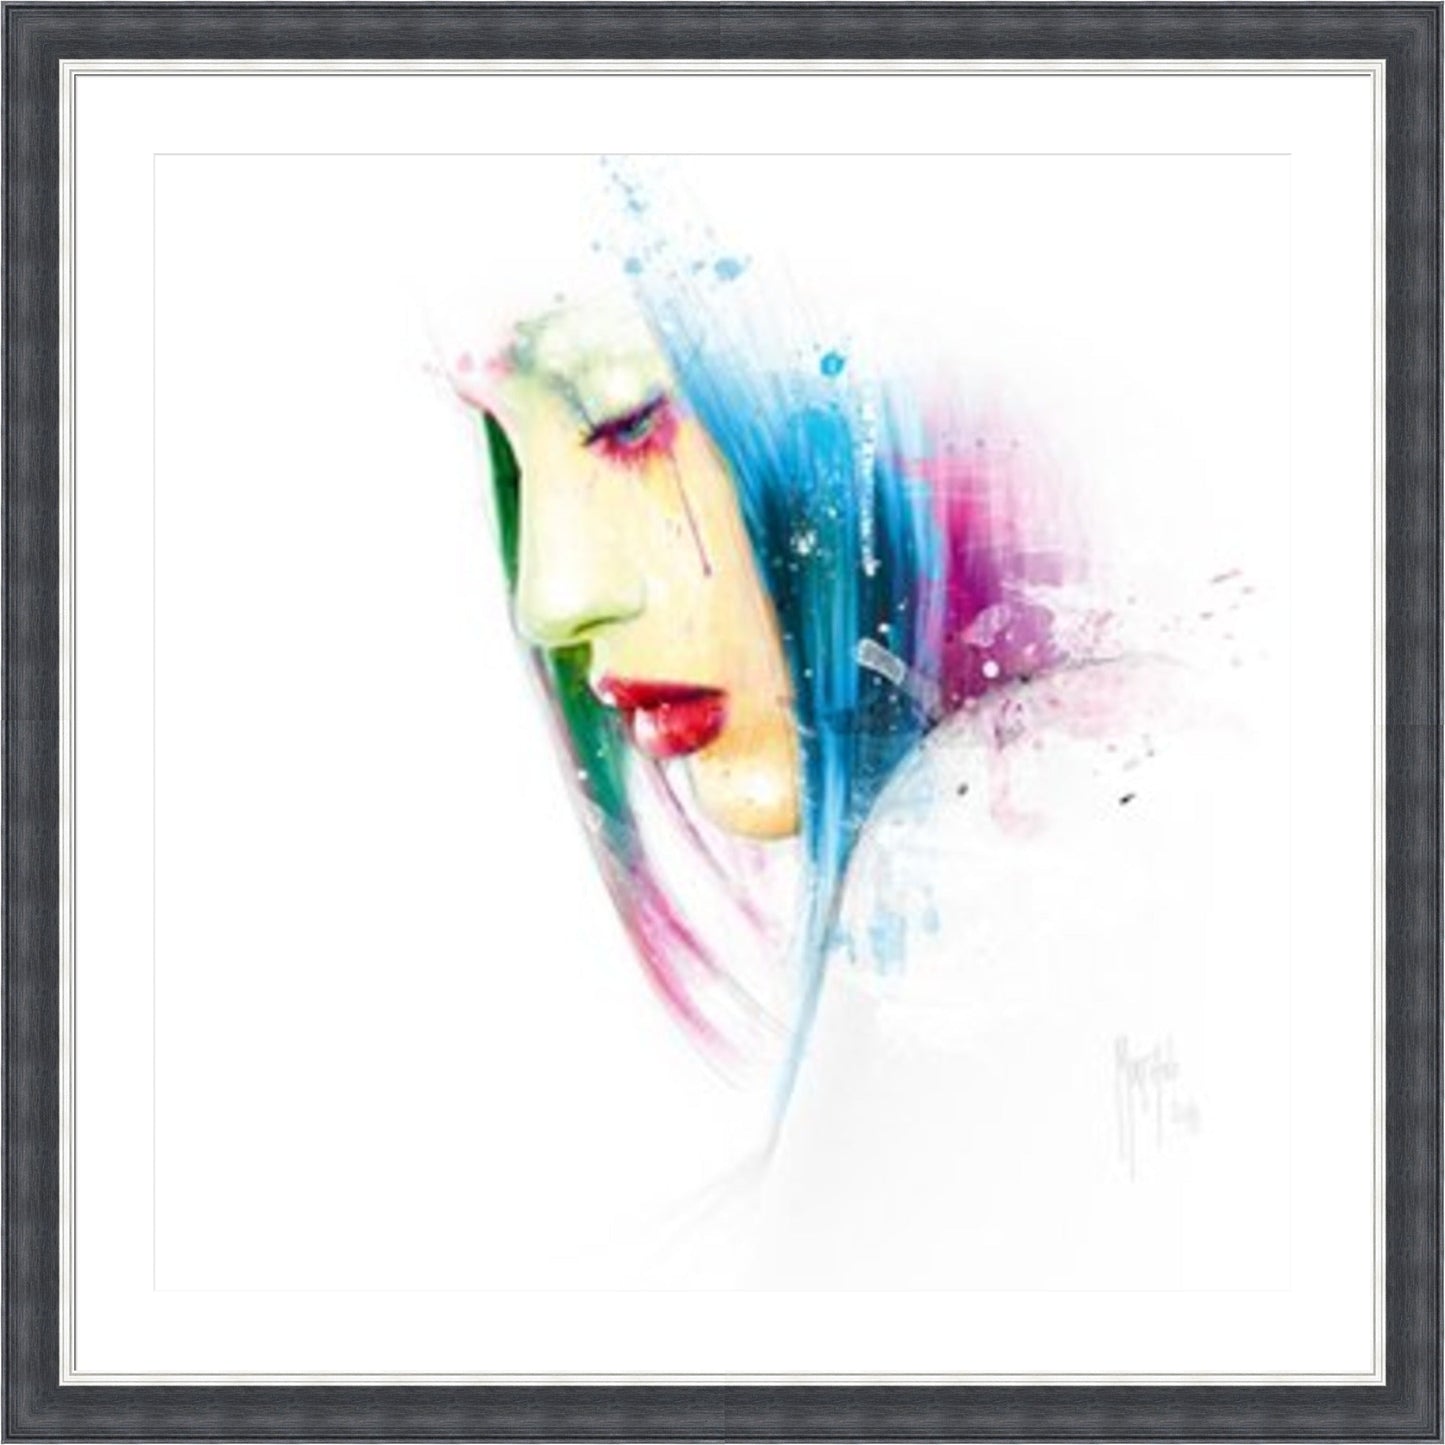 In Love by Patrice Murciano